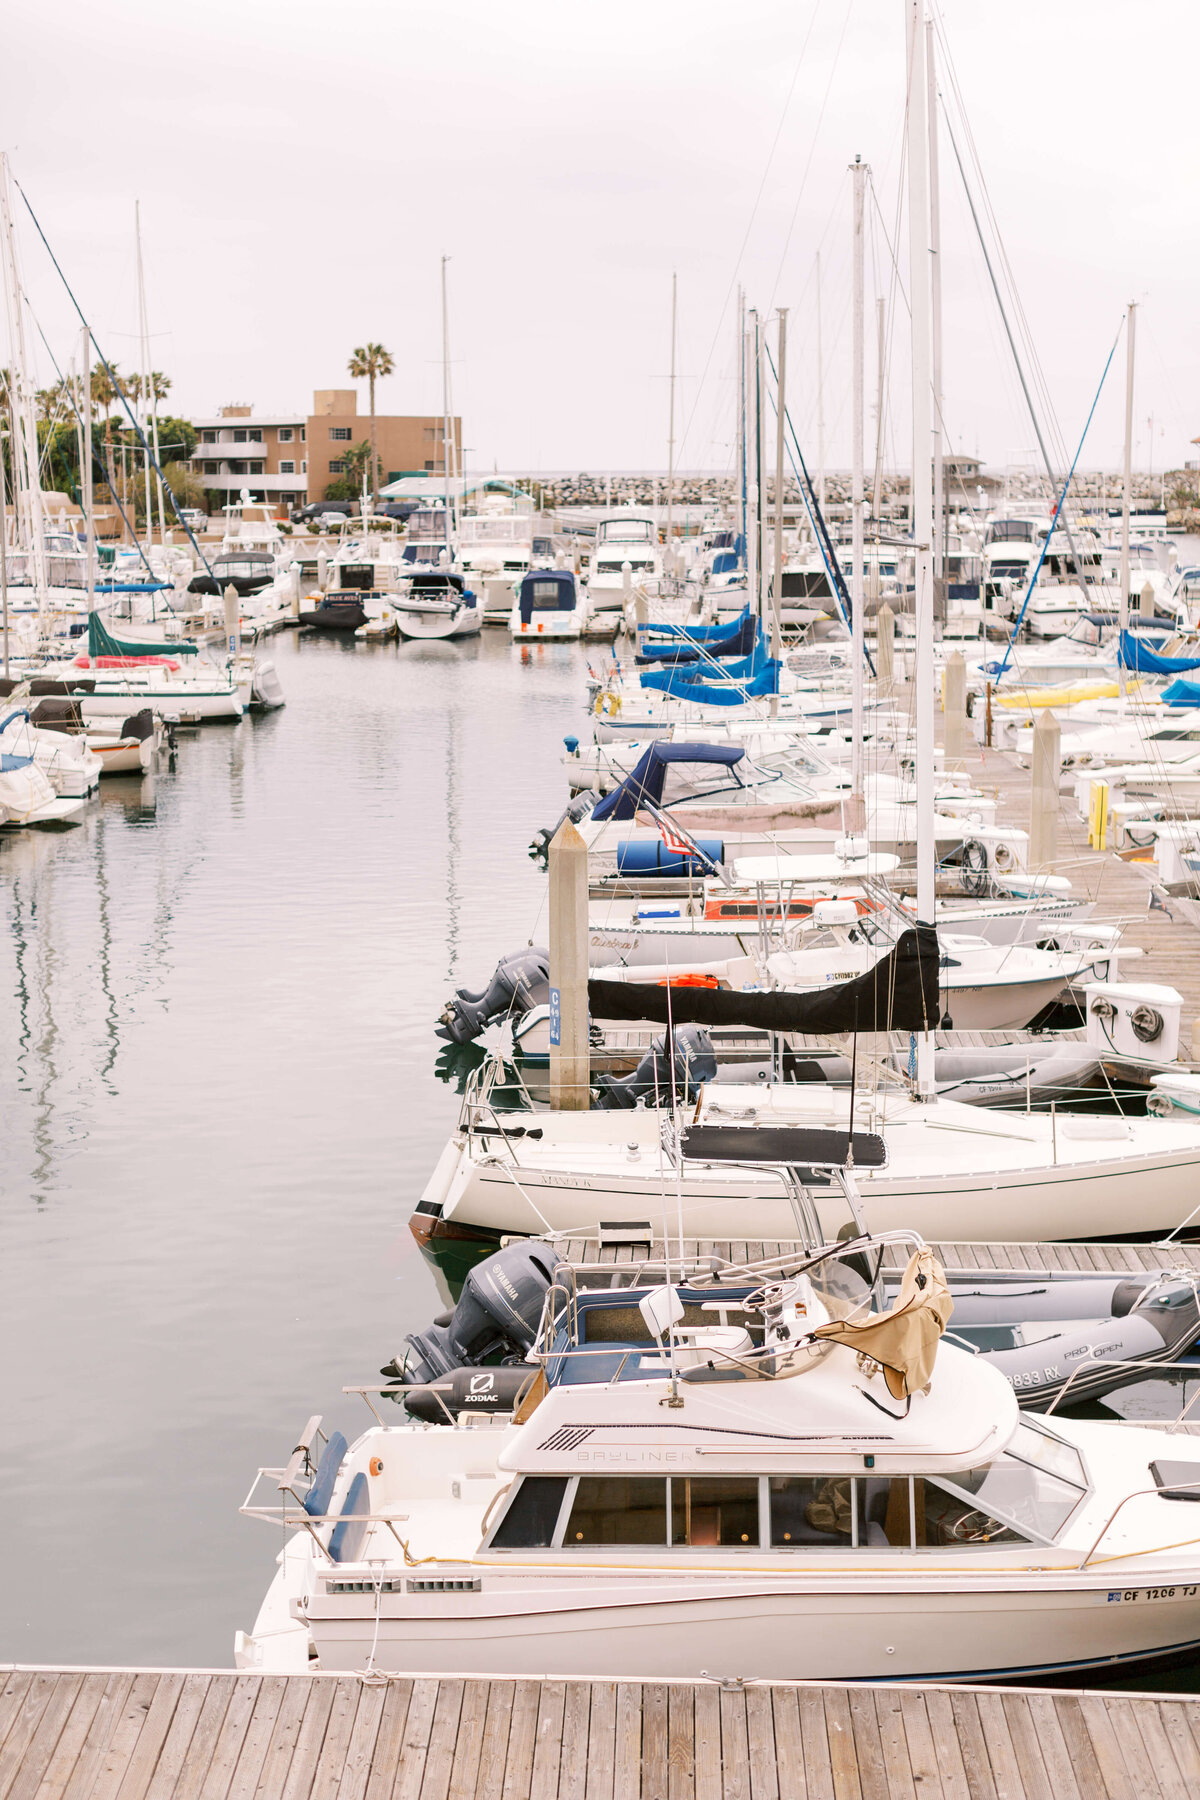 Boats in the bay for this southern california wedding venue with a view in torrance beach